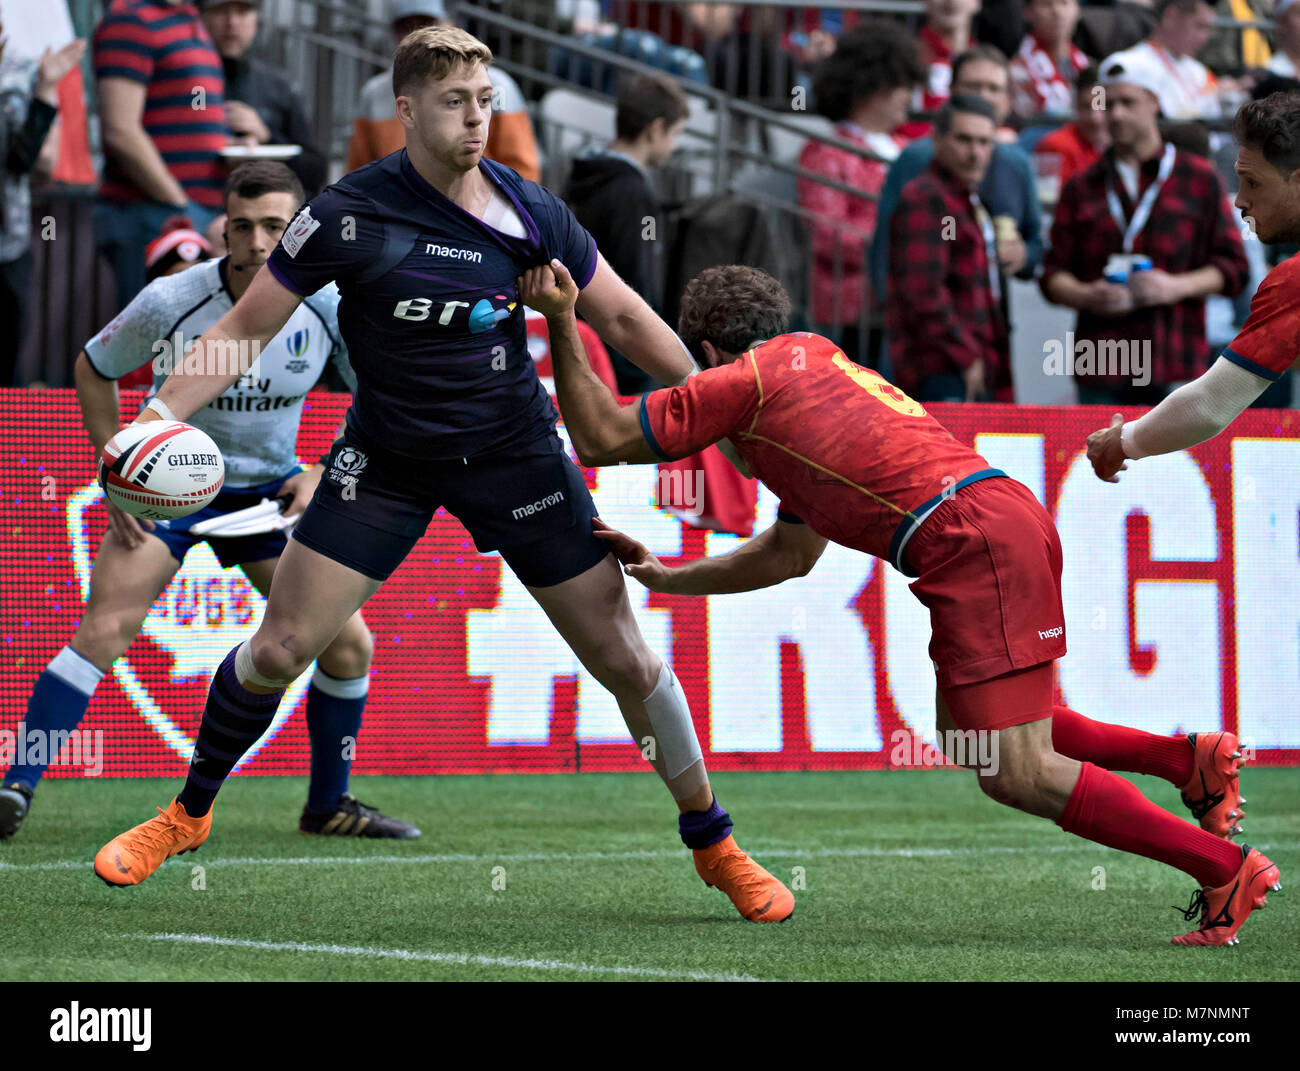 Vancouver, Canada. 11th Mar, 2018. Scotland's Glenn Bryce (L) vies with Francisco Hernandez during the World Rugby Seven Series in Vancouver, Canada, March 11, 2018. Credit: Andrew Soong/Xinhua/Alamy Live News Stock Photo